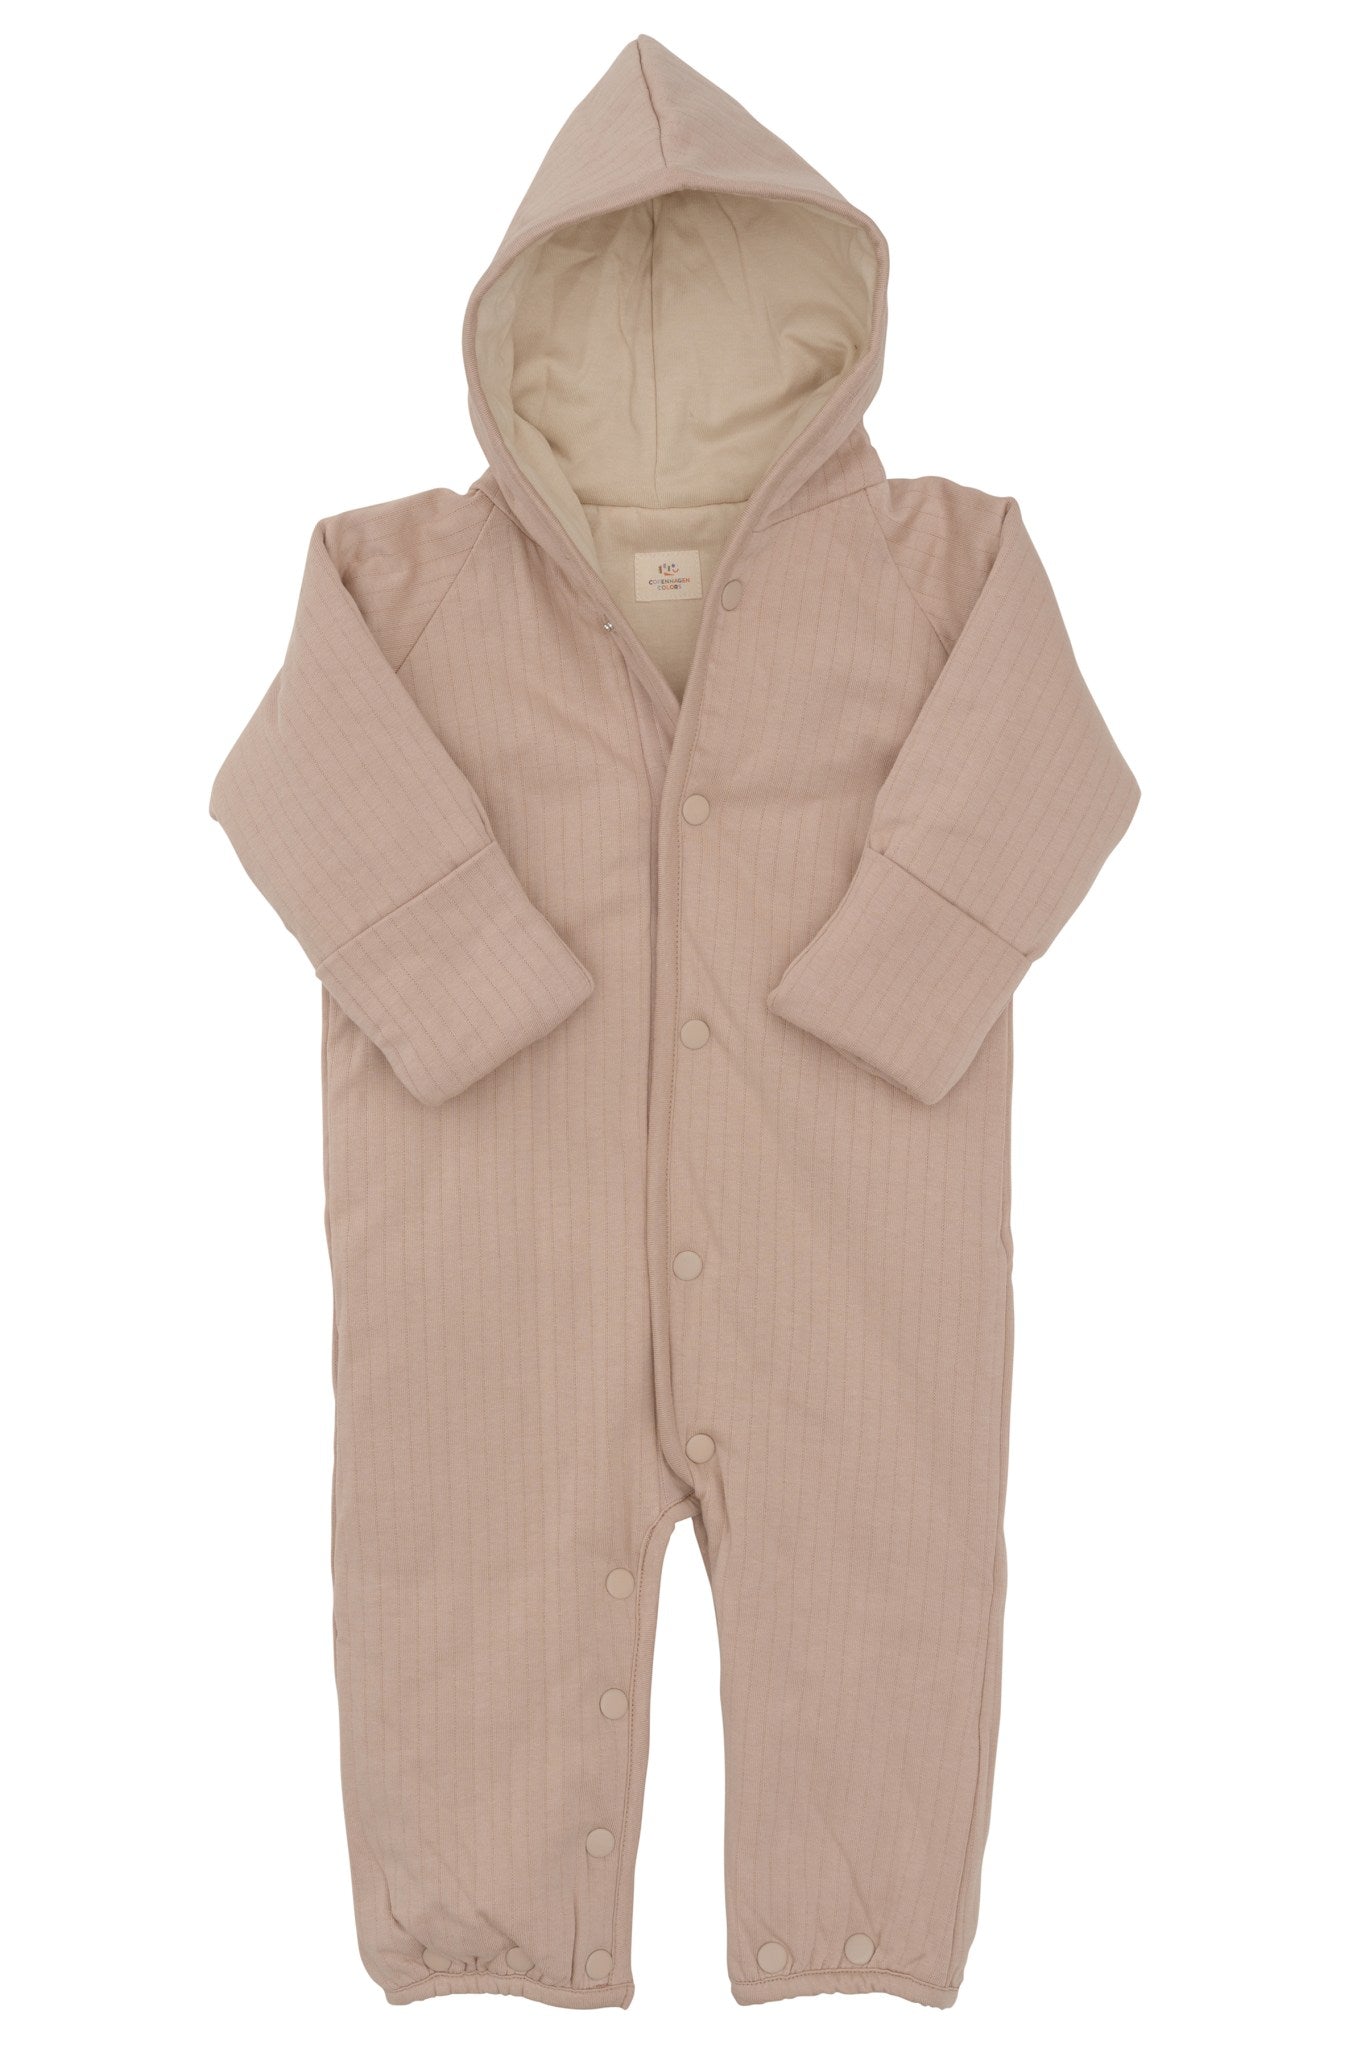 QUILTED REVERSIBLE FULL BODY AND SLEEPING BAG - LT TAUPE CREAM COMB